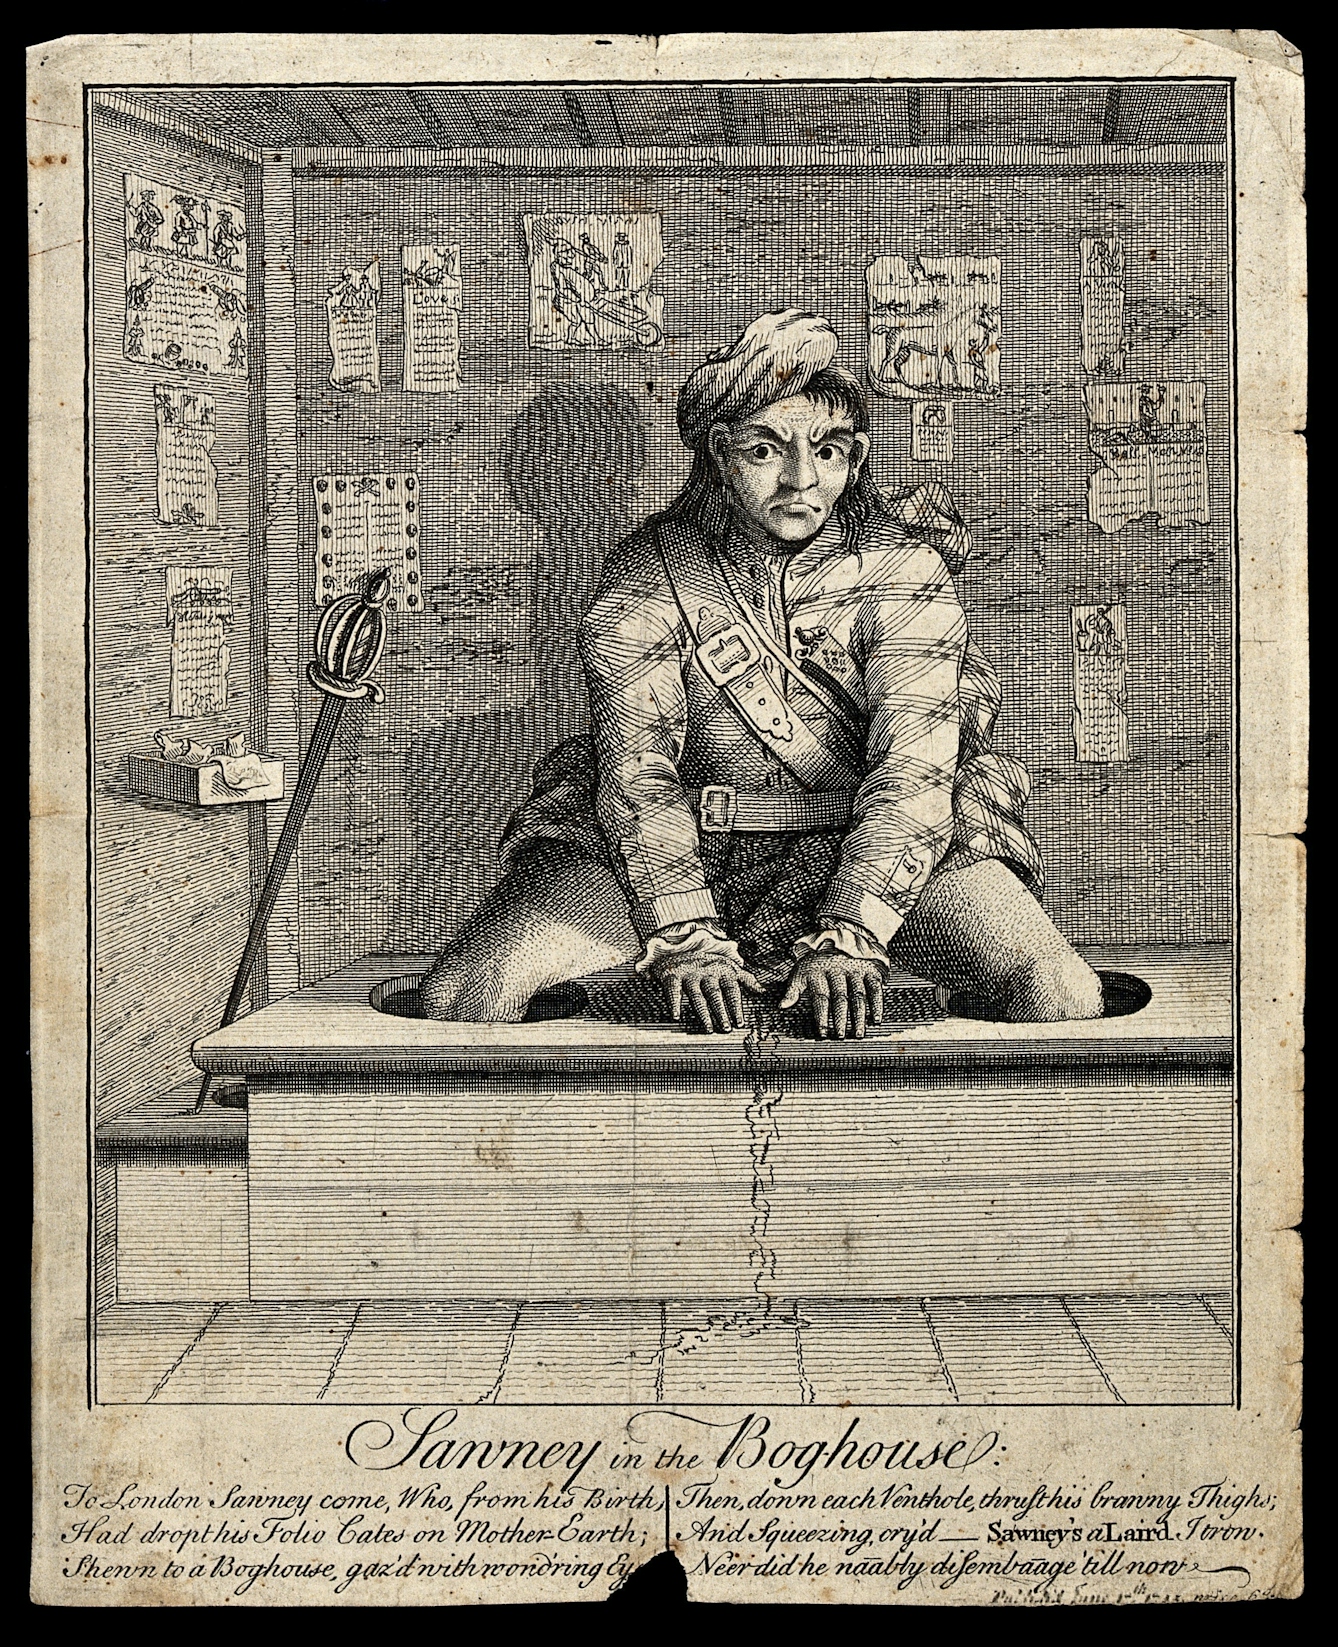 Engraving showing a Scotsman (wearing a kilt, tartan jacket and beret) using a lavatory. He is seated on a latrine with his legs thrust down the holes in the board and his hands placed before him; his urine trickles over the edge of the toilet. To his right are his sword and a box of paper.